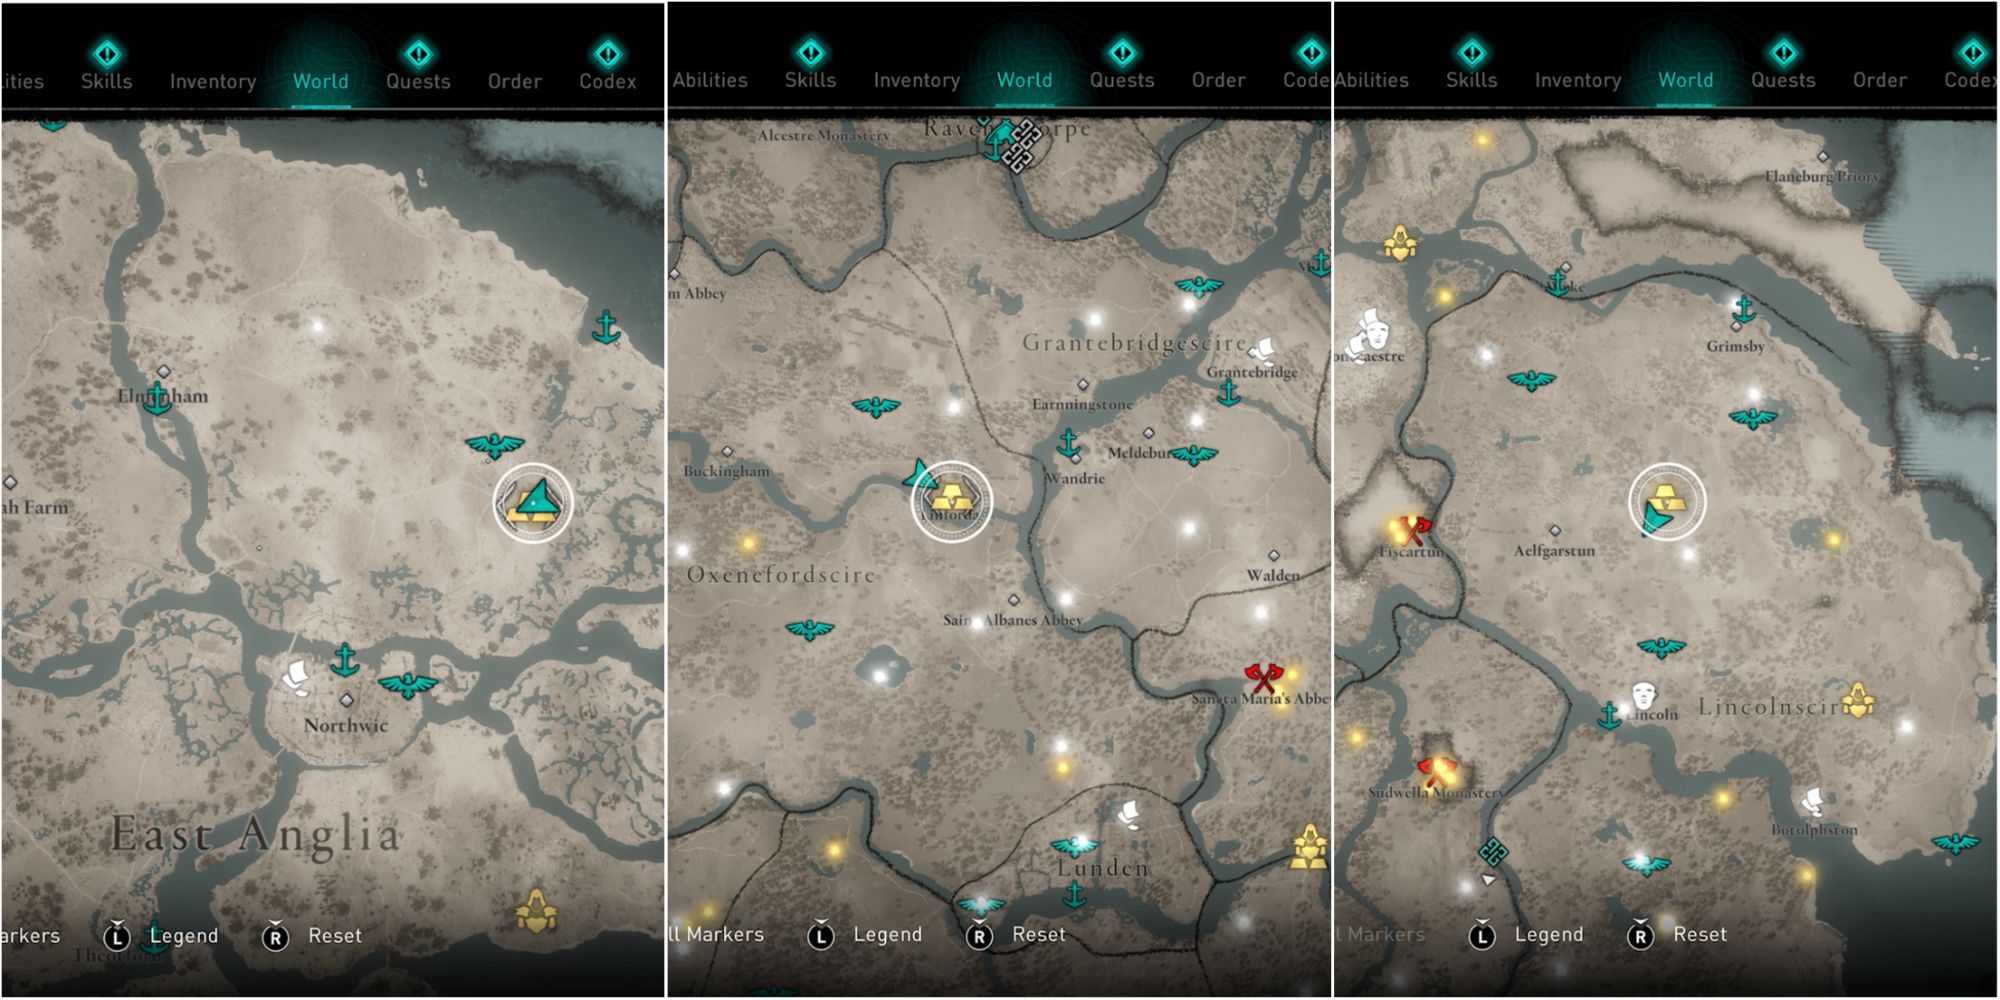 Assassin's Creed Valhalla Split Image Showing Wealth Locations